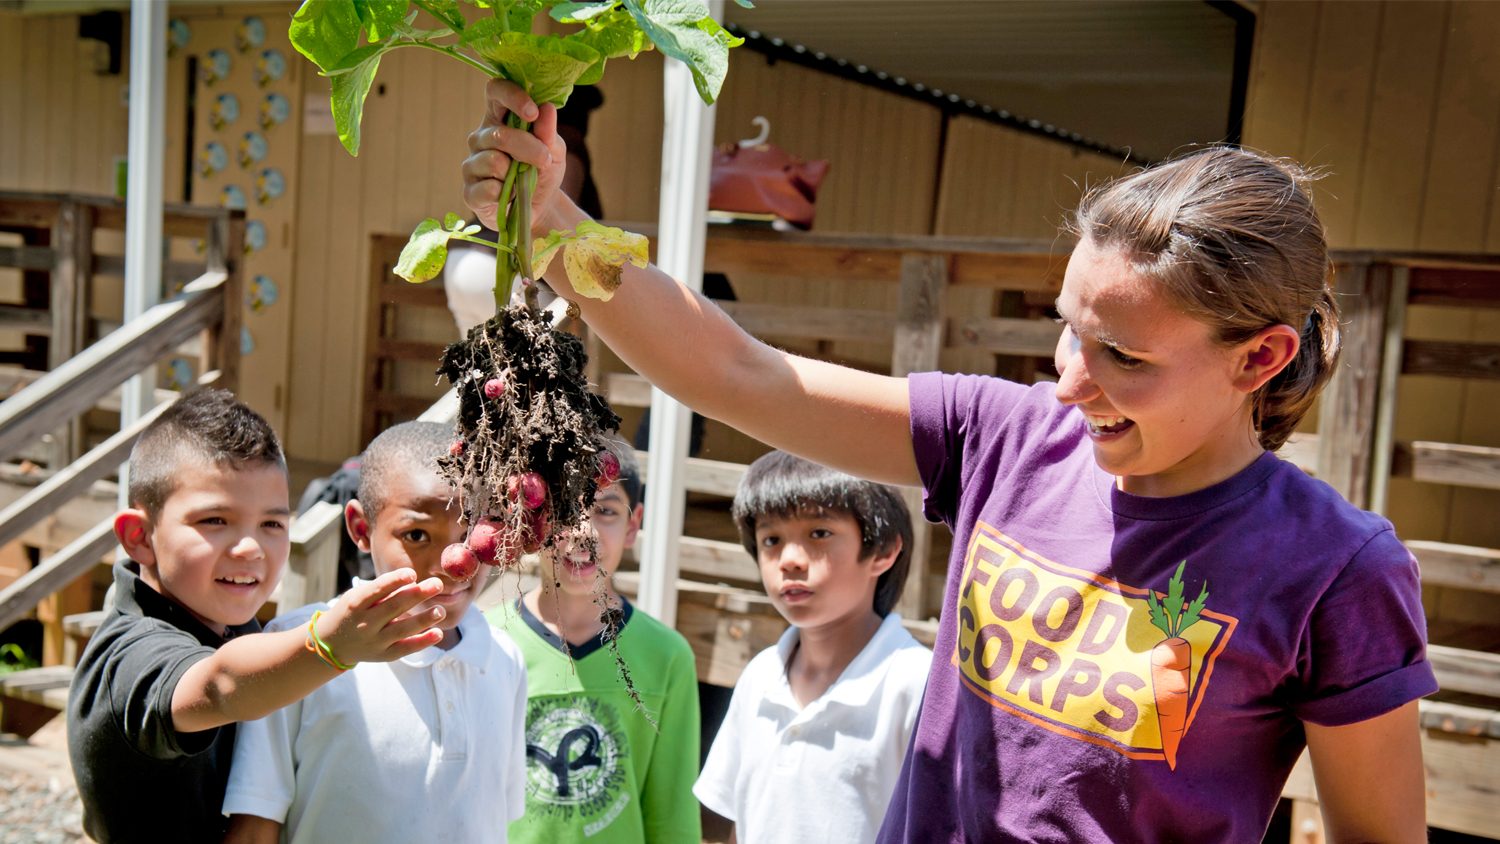 Teaching children about the value of local, fresh foods.